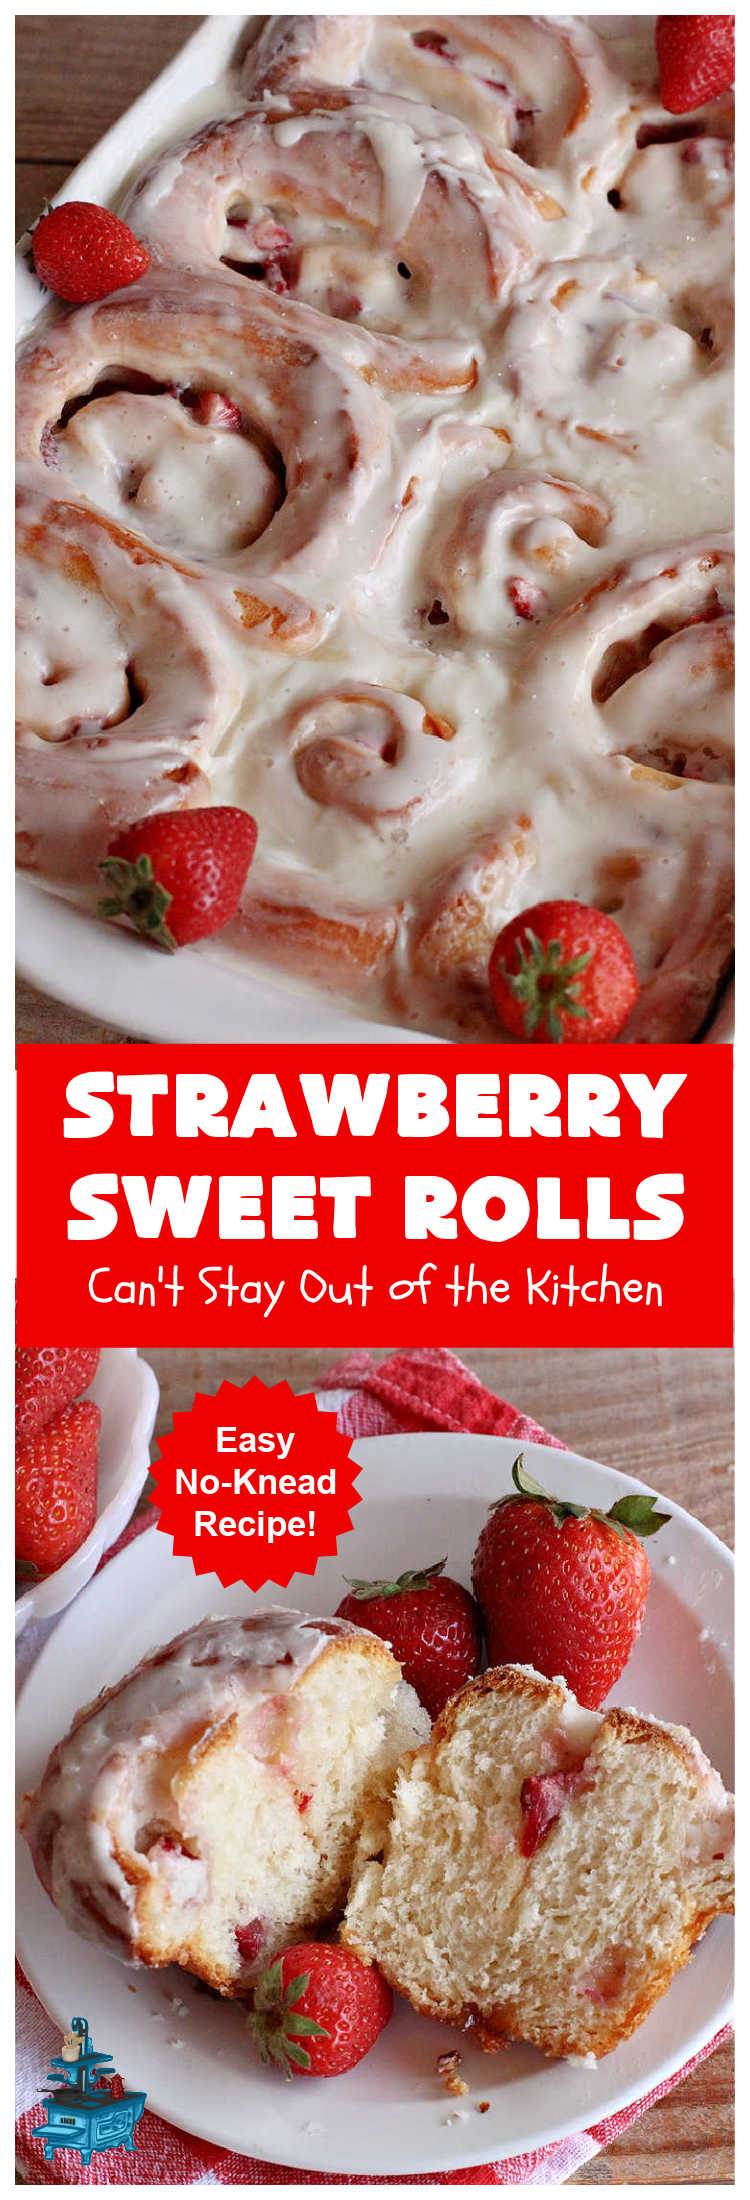 Strawberry Sweet Rolls | Can't Stay Out of the Kitchen